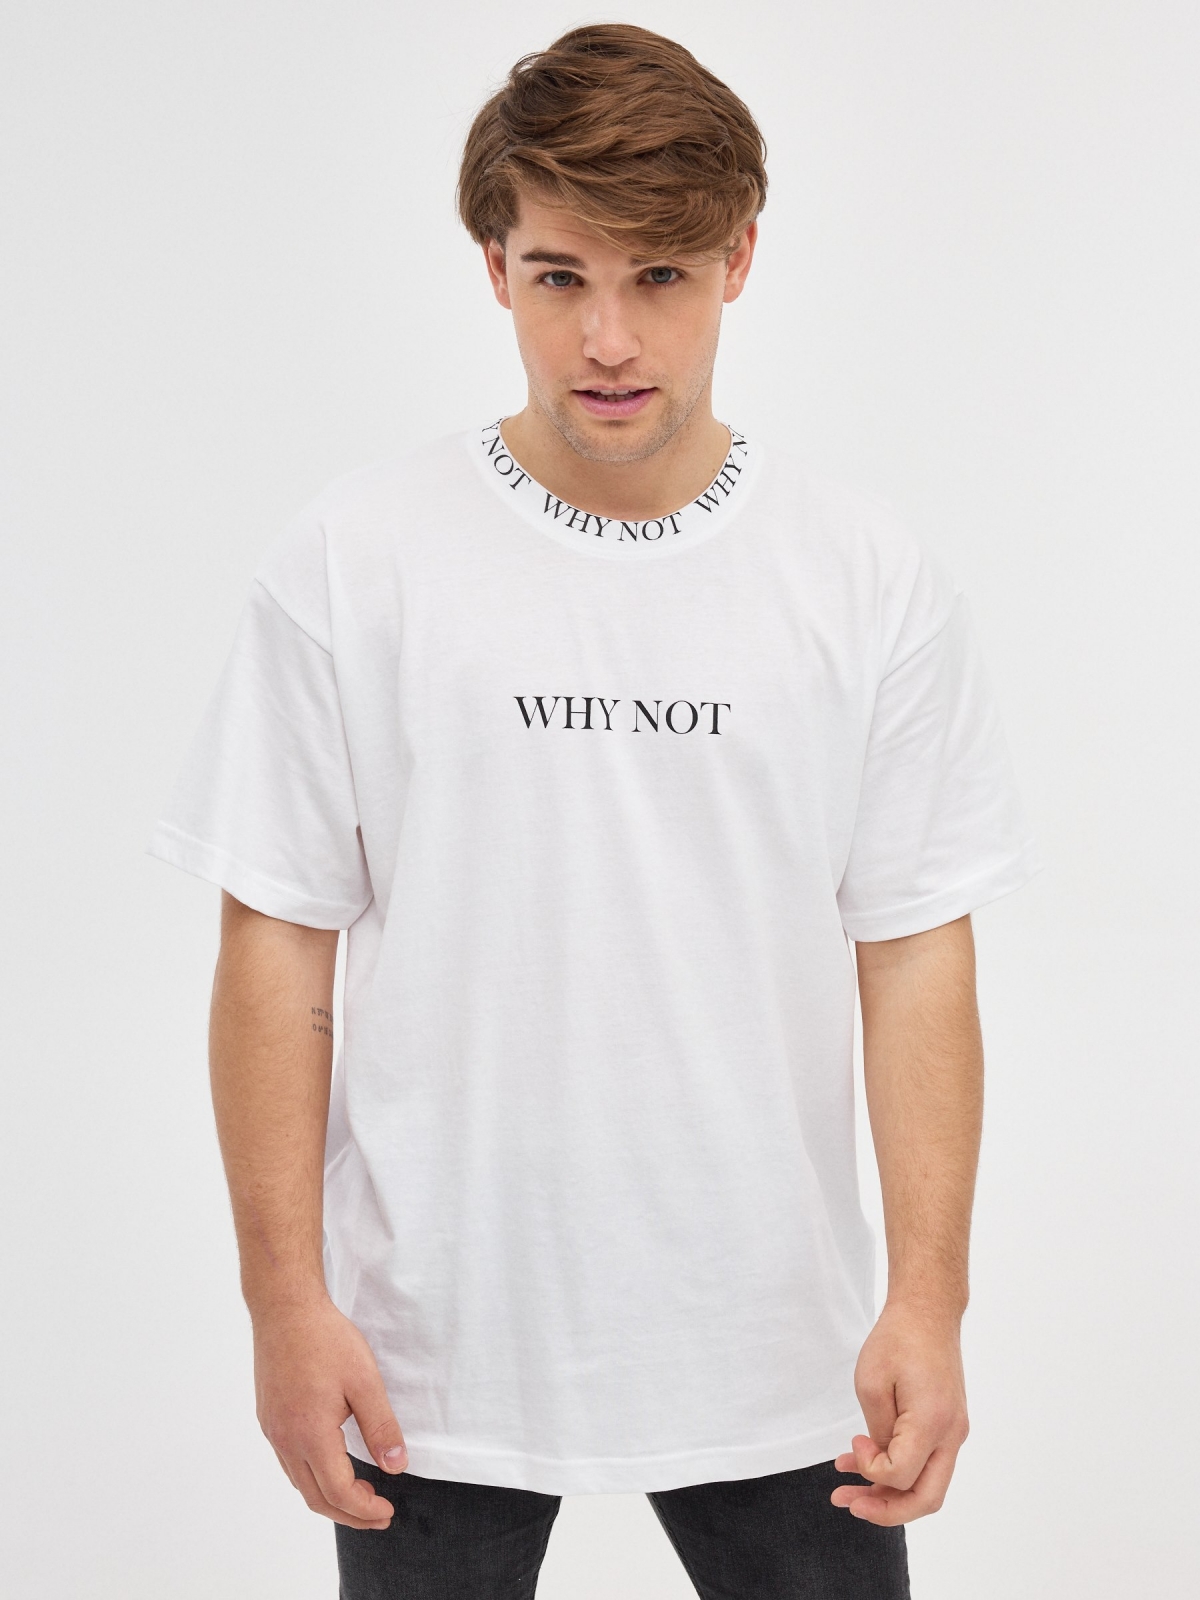 Why Not T-shirt white middle front view